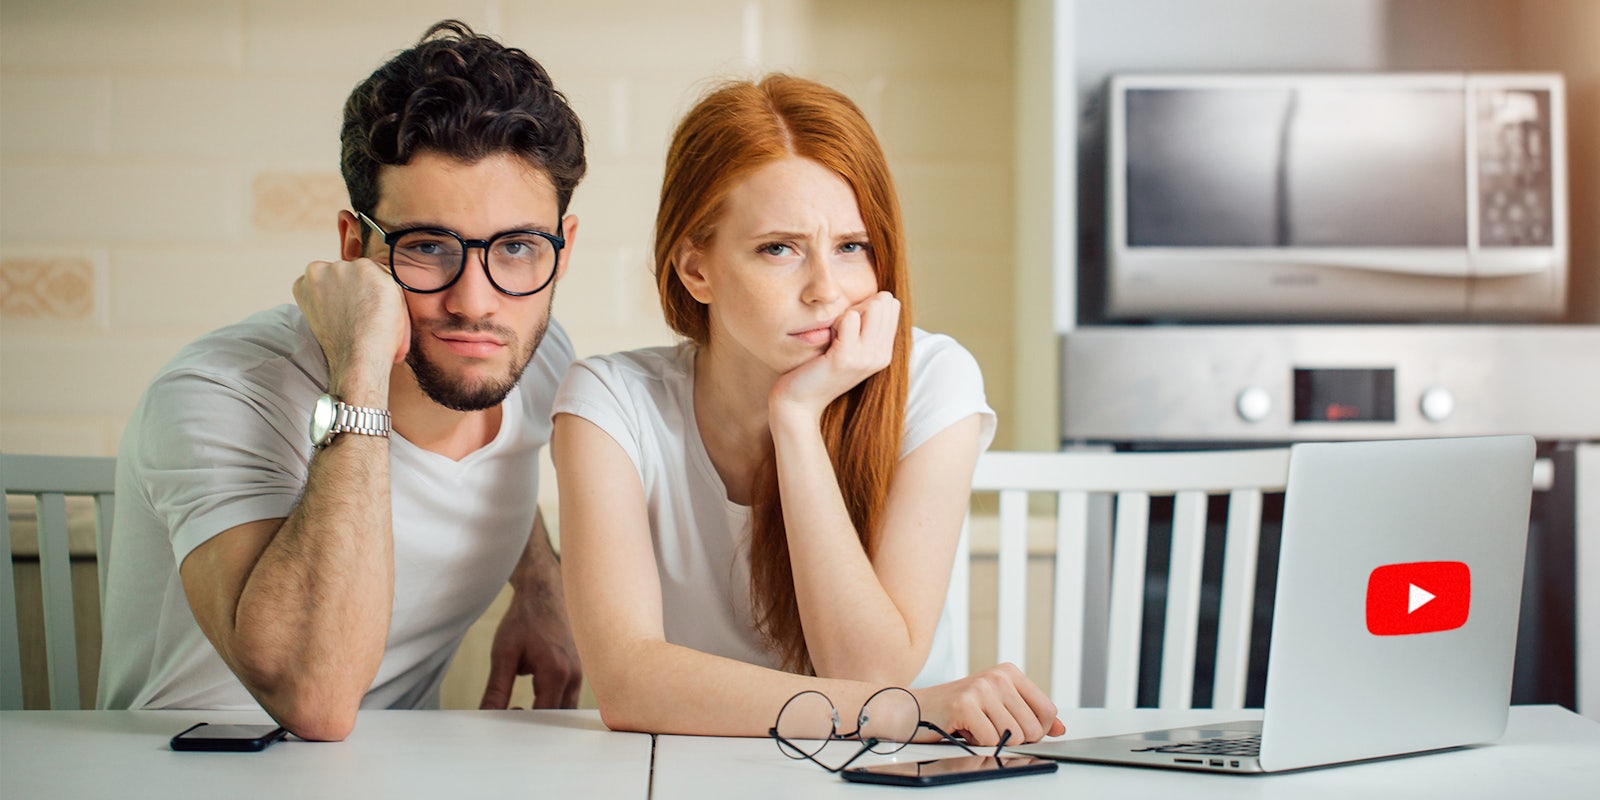 Upset couple in front of laptop with YouTube logo